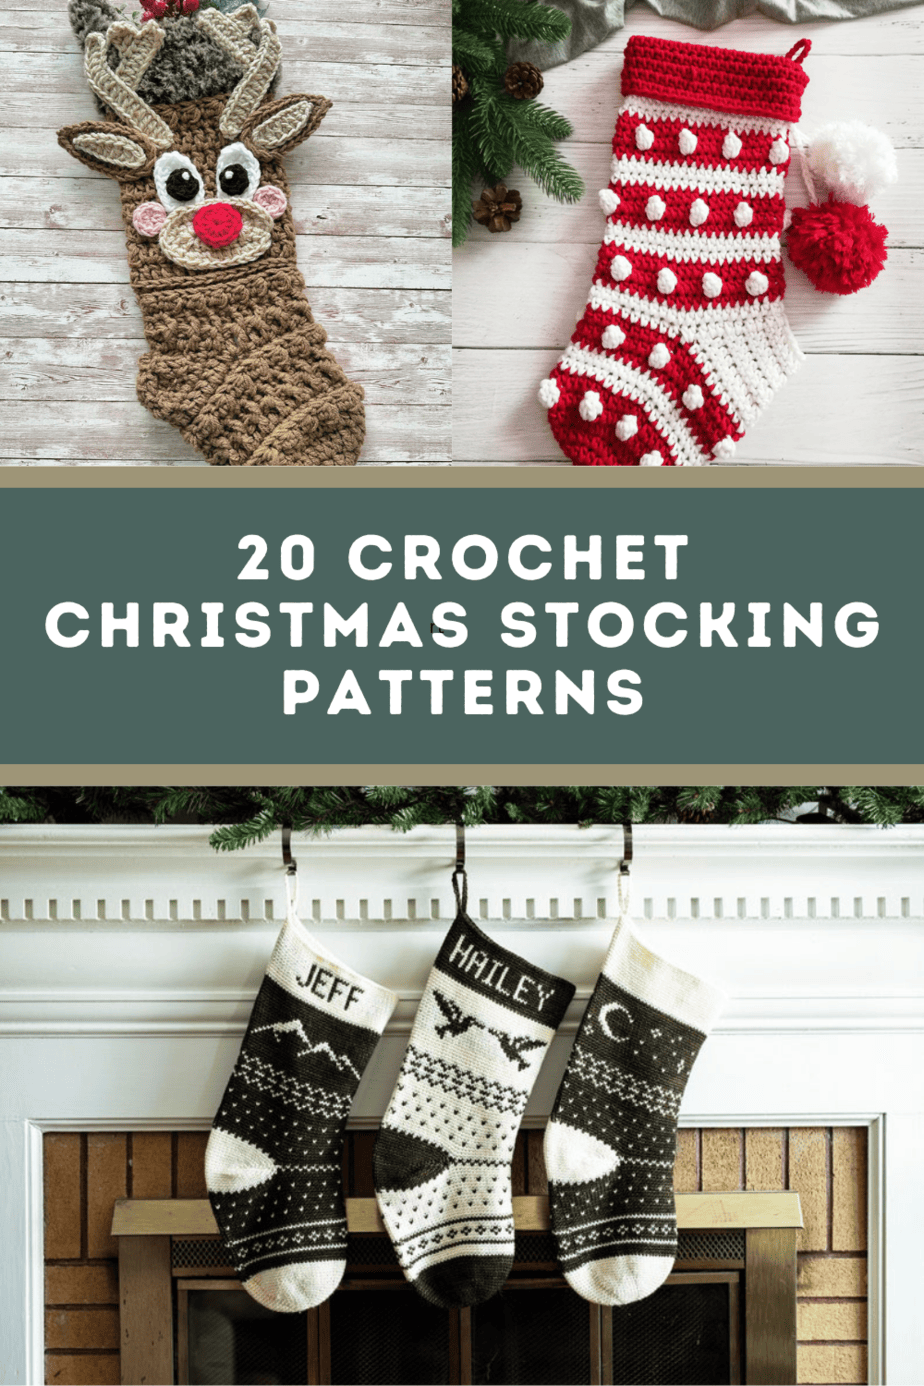 Crochet Christmas Stocking - Free and Paid Patterns